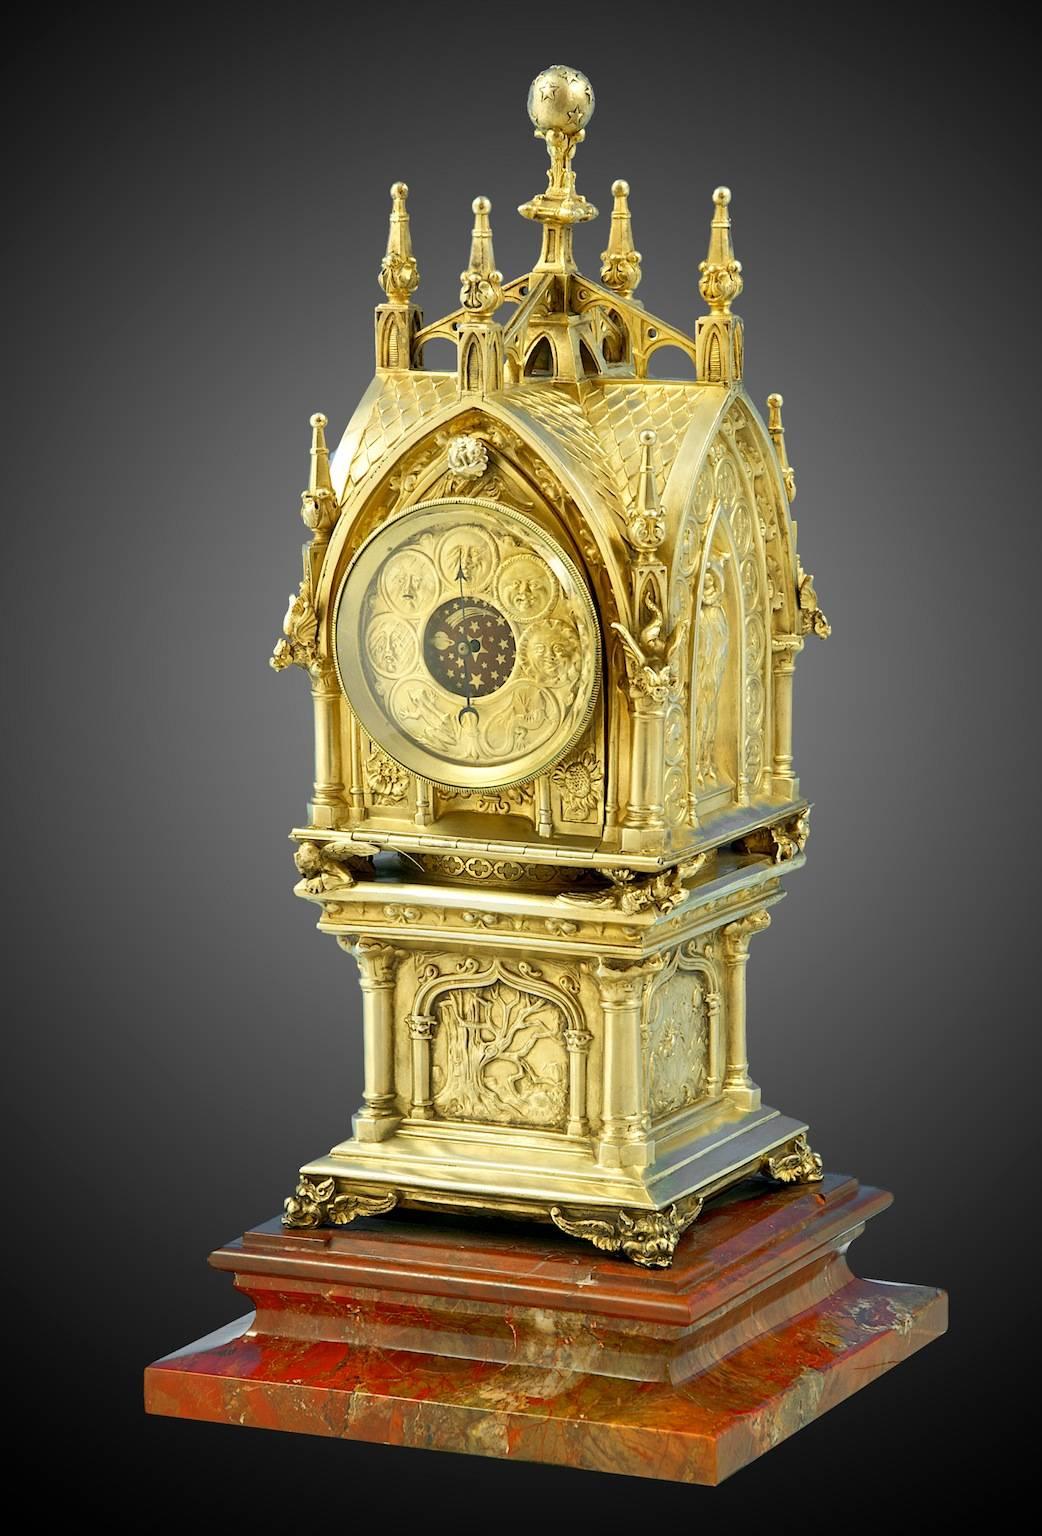 The design attributed by Lucien Clement Steiner, circa 1878.
Measures: 13 inches (33cm) high.
Signed 'Tiffany' on the case and movement.
Also signed 'Steiner' on the case.
 